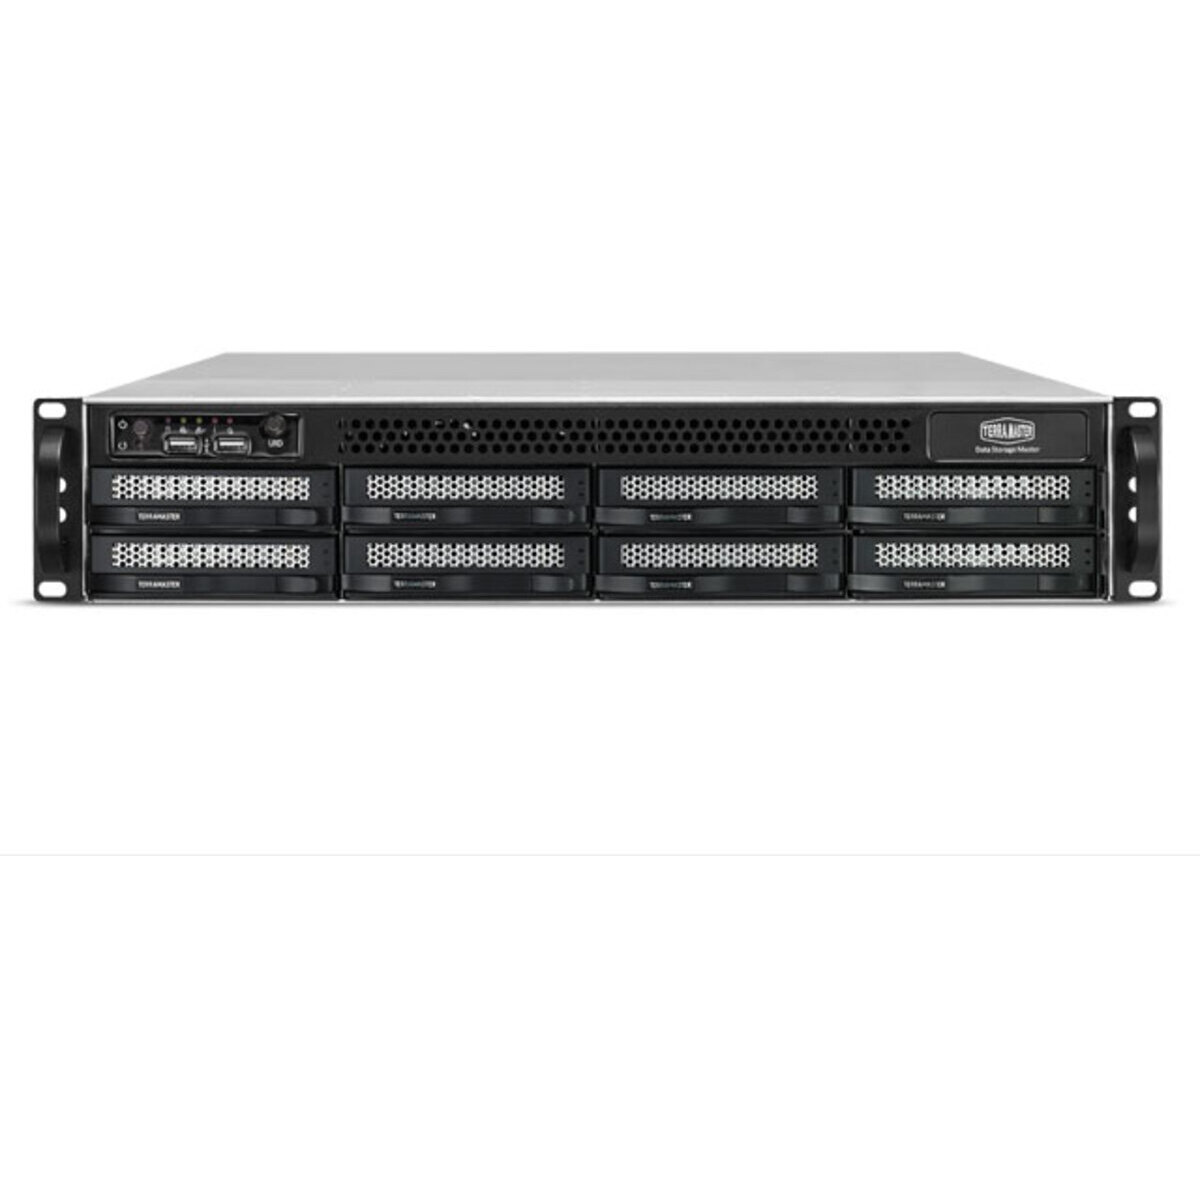 TerraMaster U8-522-9400 70tb 8-Bay RackMount Large Business / Enterprise NAS - Network Attached Storage Device 7x10tb Seagate EXOS X18 ST10000NM018G 3.5 7200rpm SATA 6Gb/s HDD ENTERPRISE Class Drives Installed - Burn-In Tested U8-522-9400